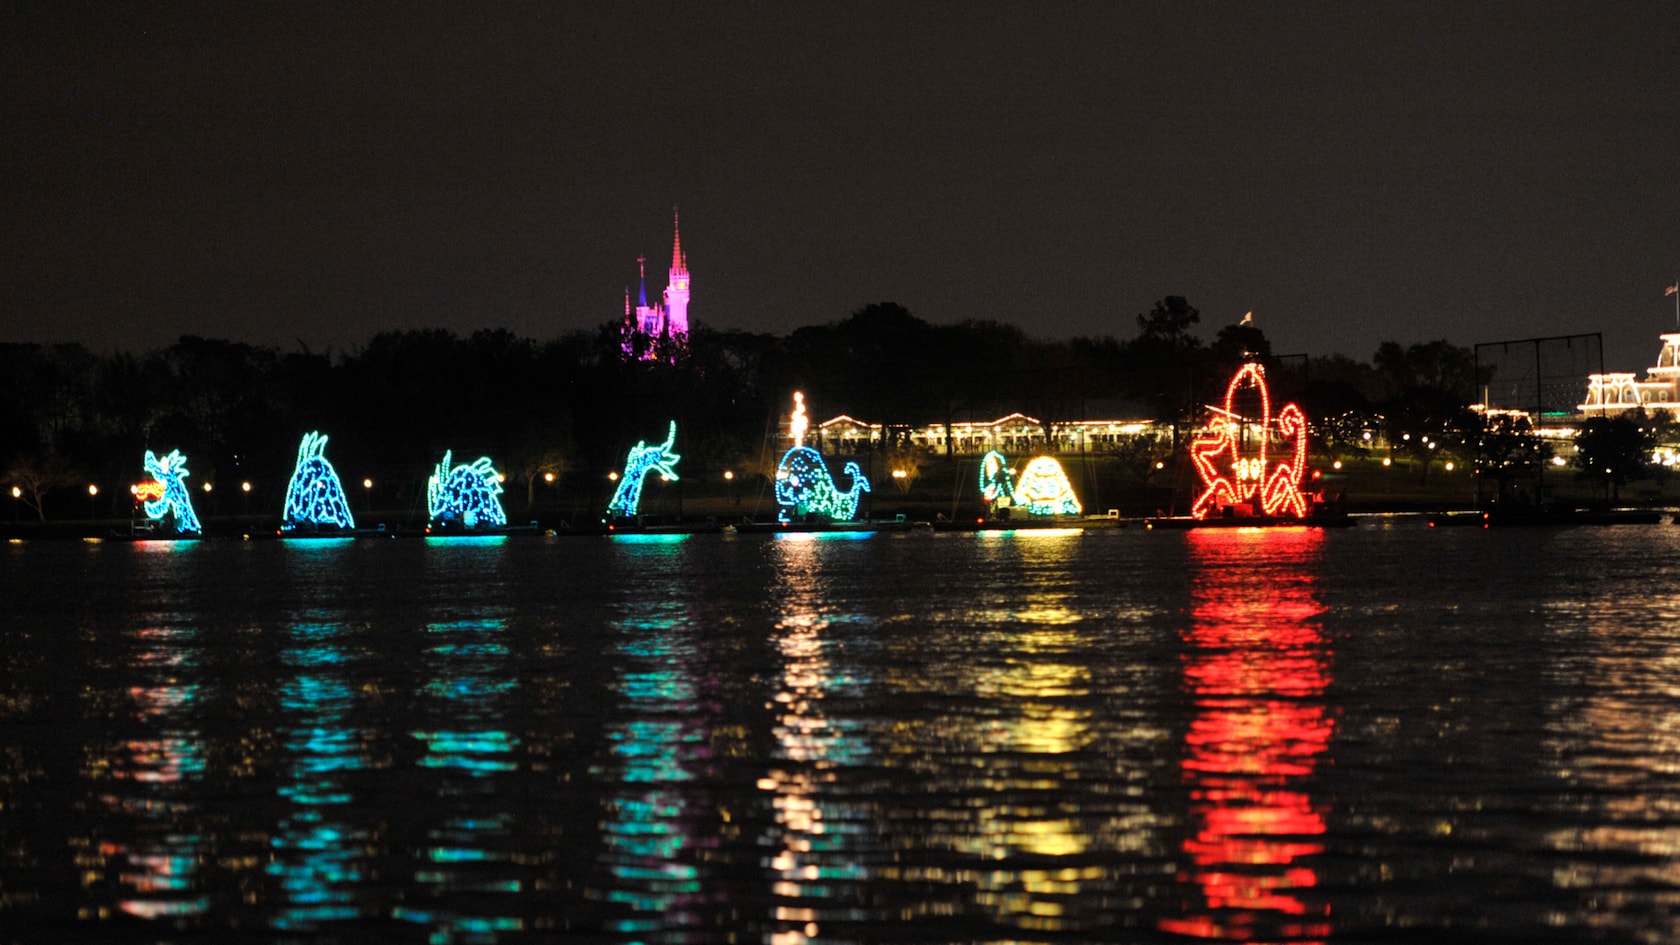 Electrical Water Pageant show at Seven Seas Lagoon